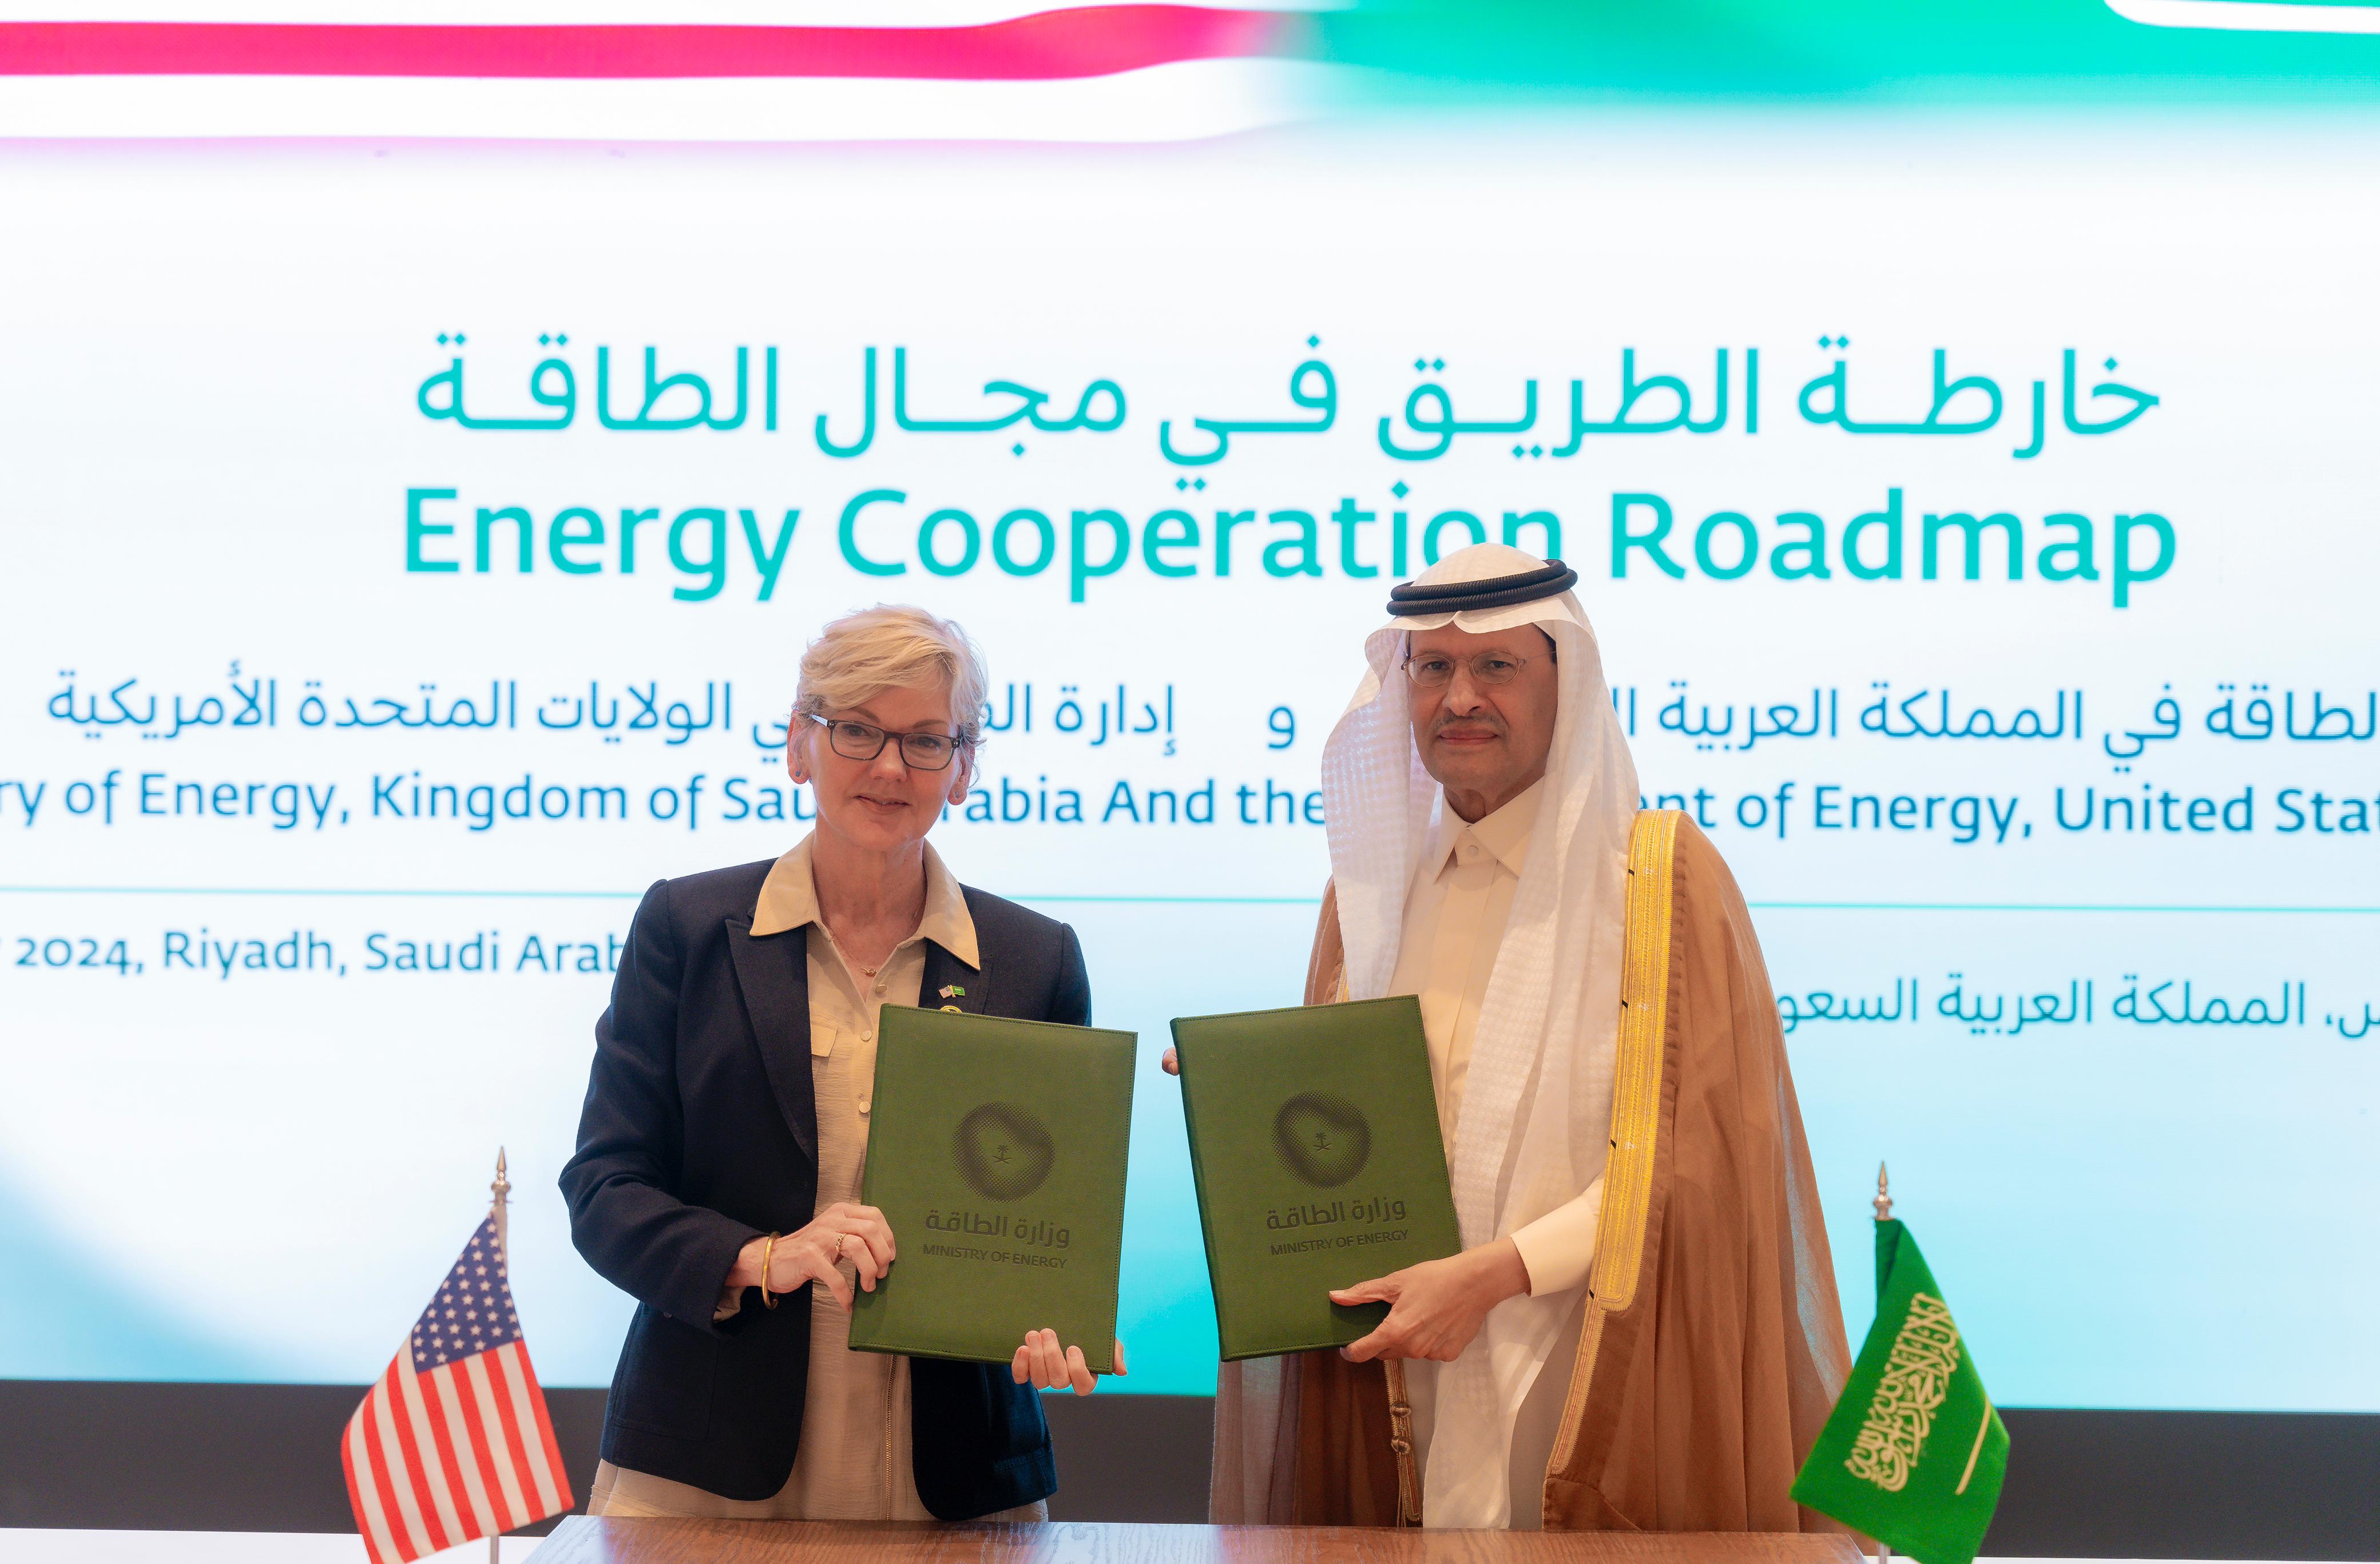 HRH Minister of Energy meets with US Secretary of Energy and they sign a roadmap for cooperation in the field of energy